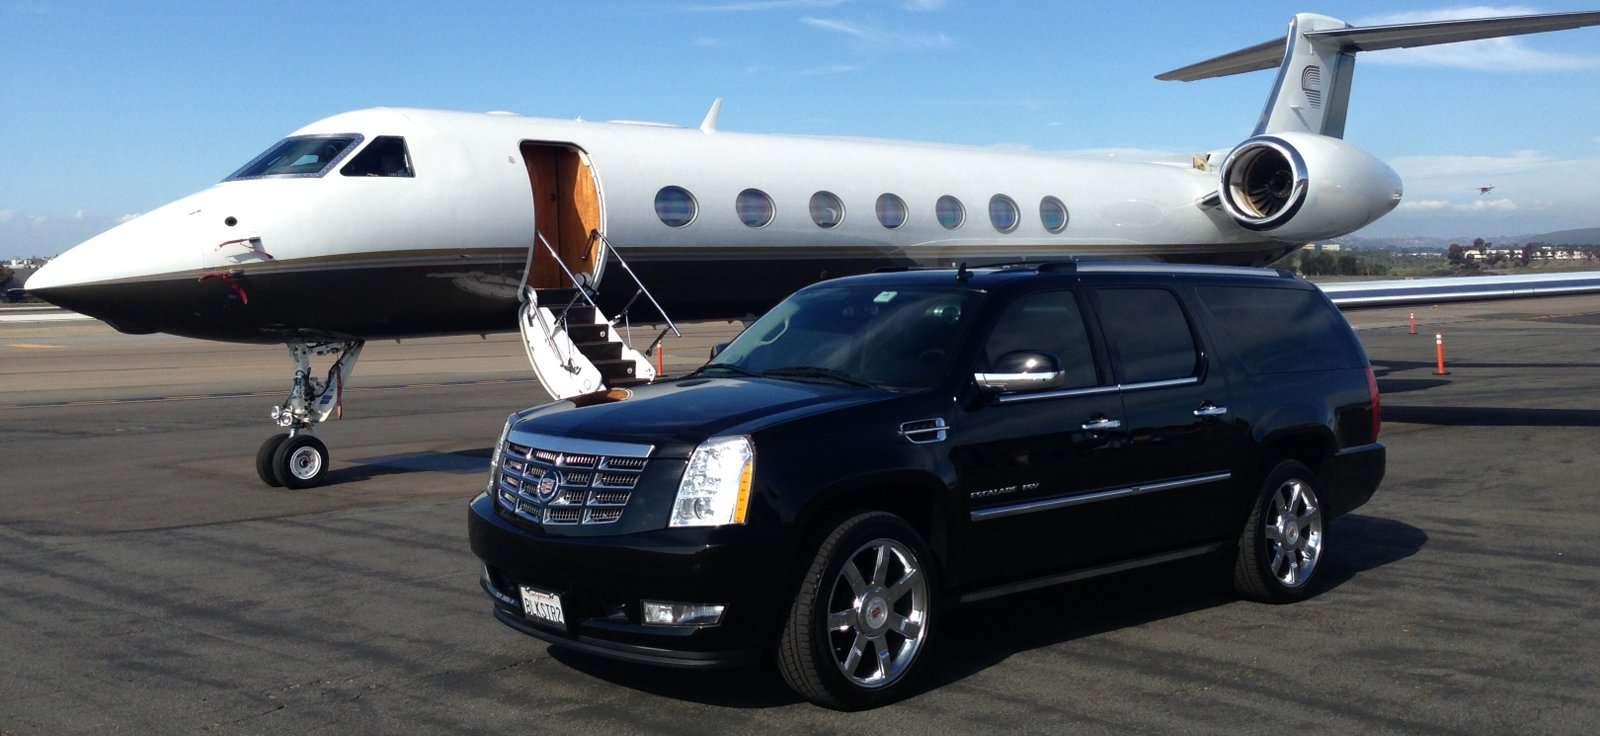 DC Airport Car Service - Infinity Limo Car